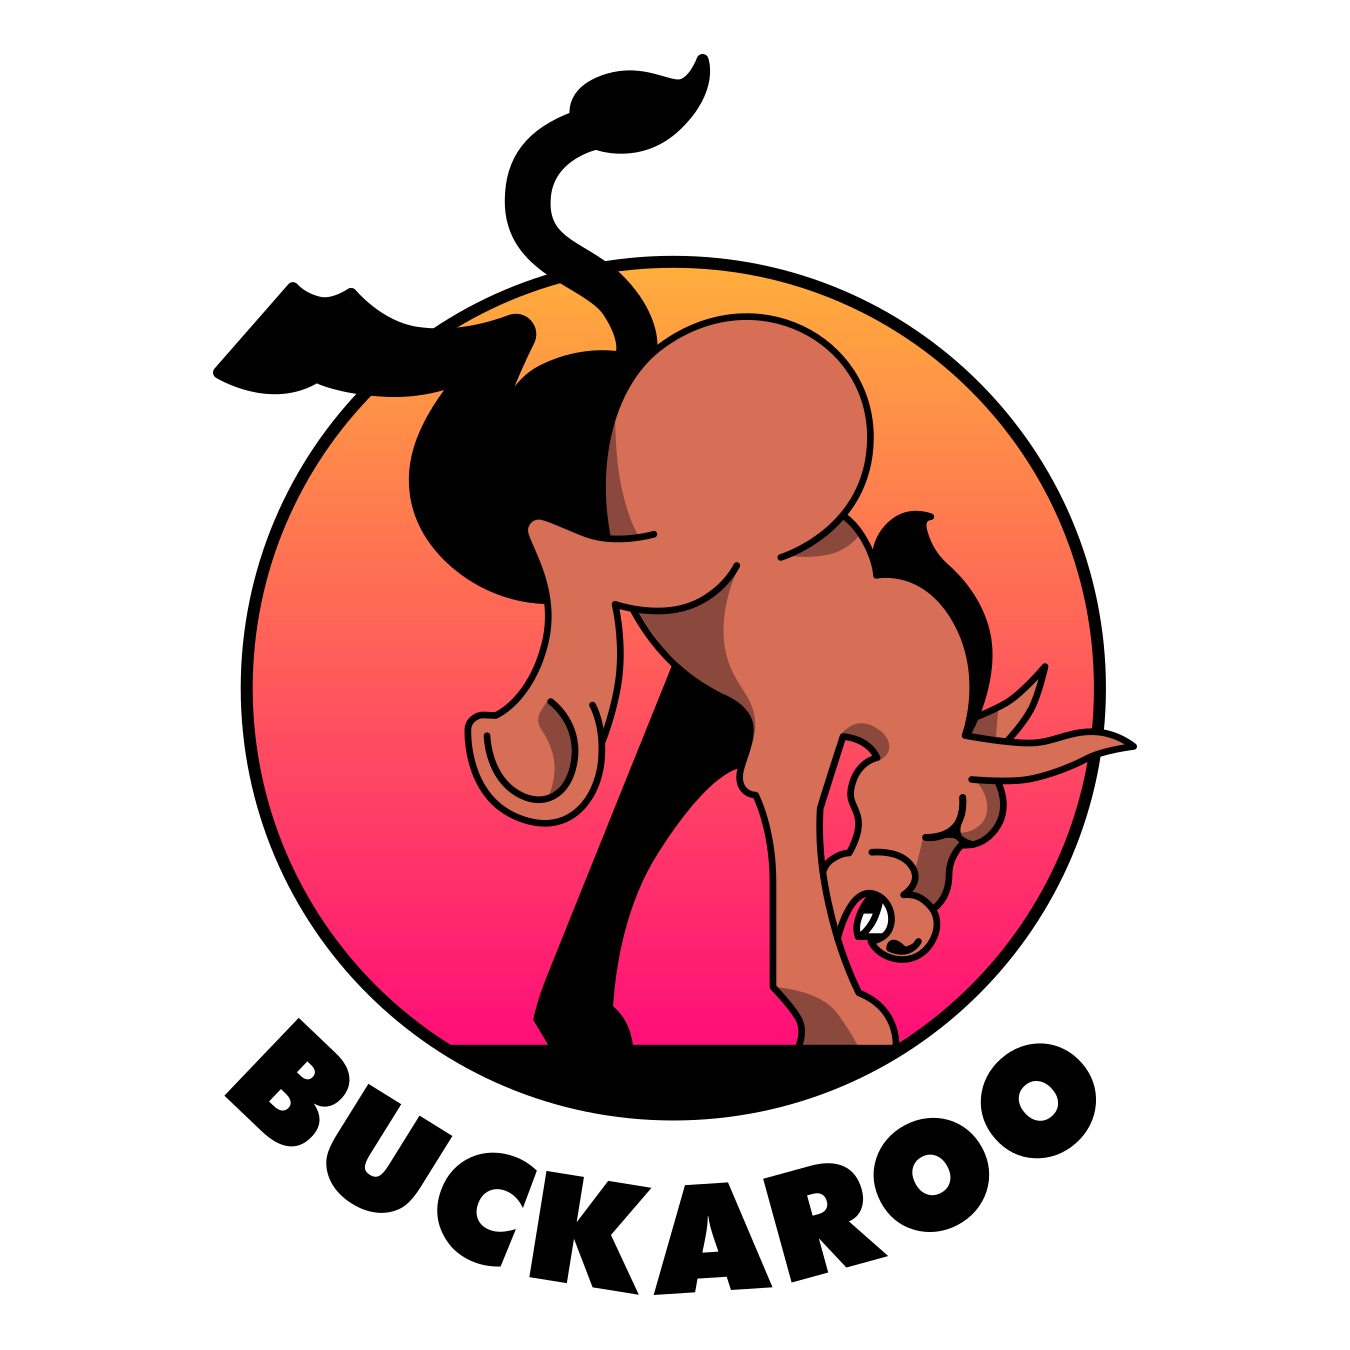 /whats-new-in-buckaroo-2-cd3862f8fc6f feature image